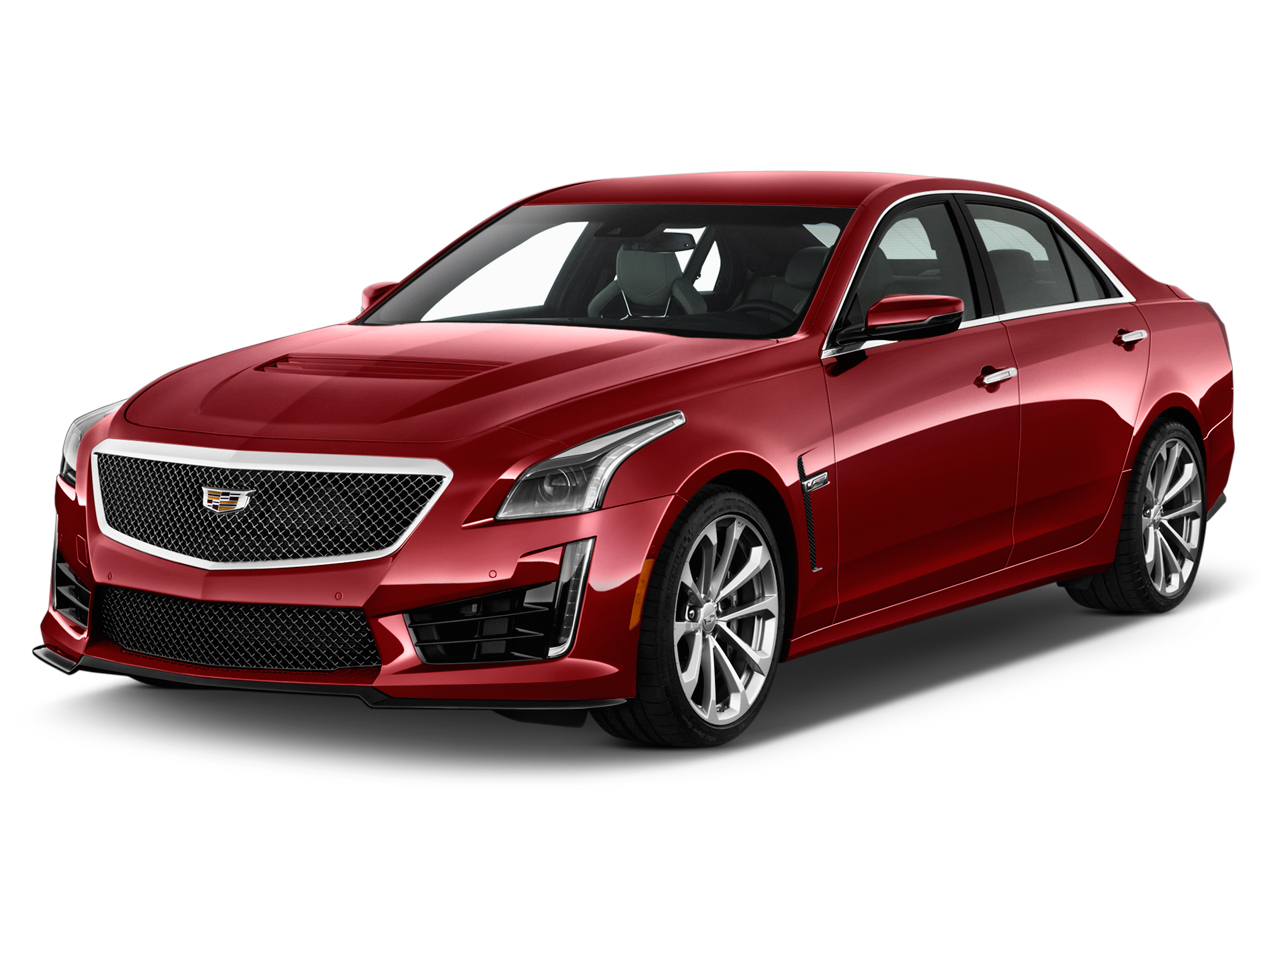 2019 Cadillac CTS V Review Ratings Specs Prices and Photos The 